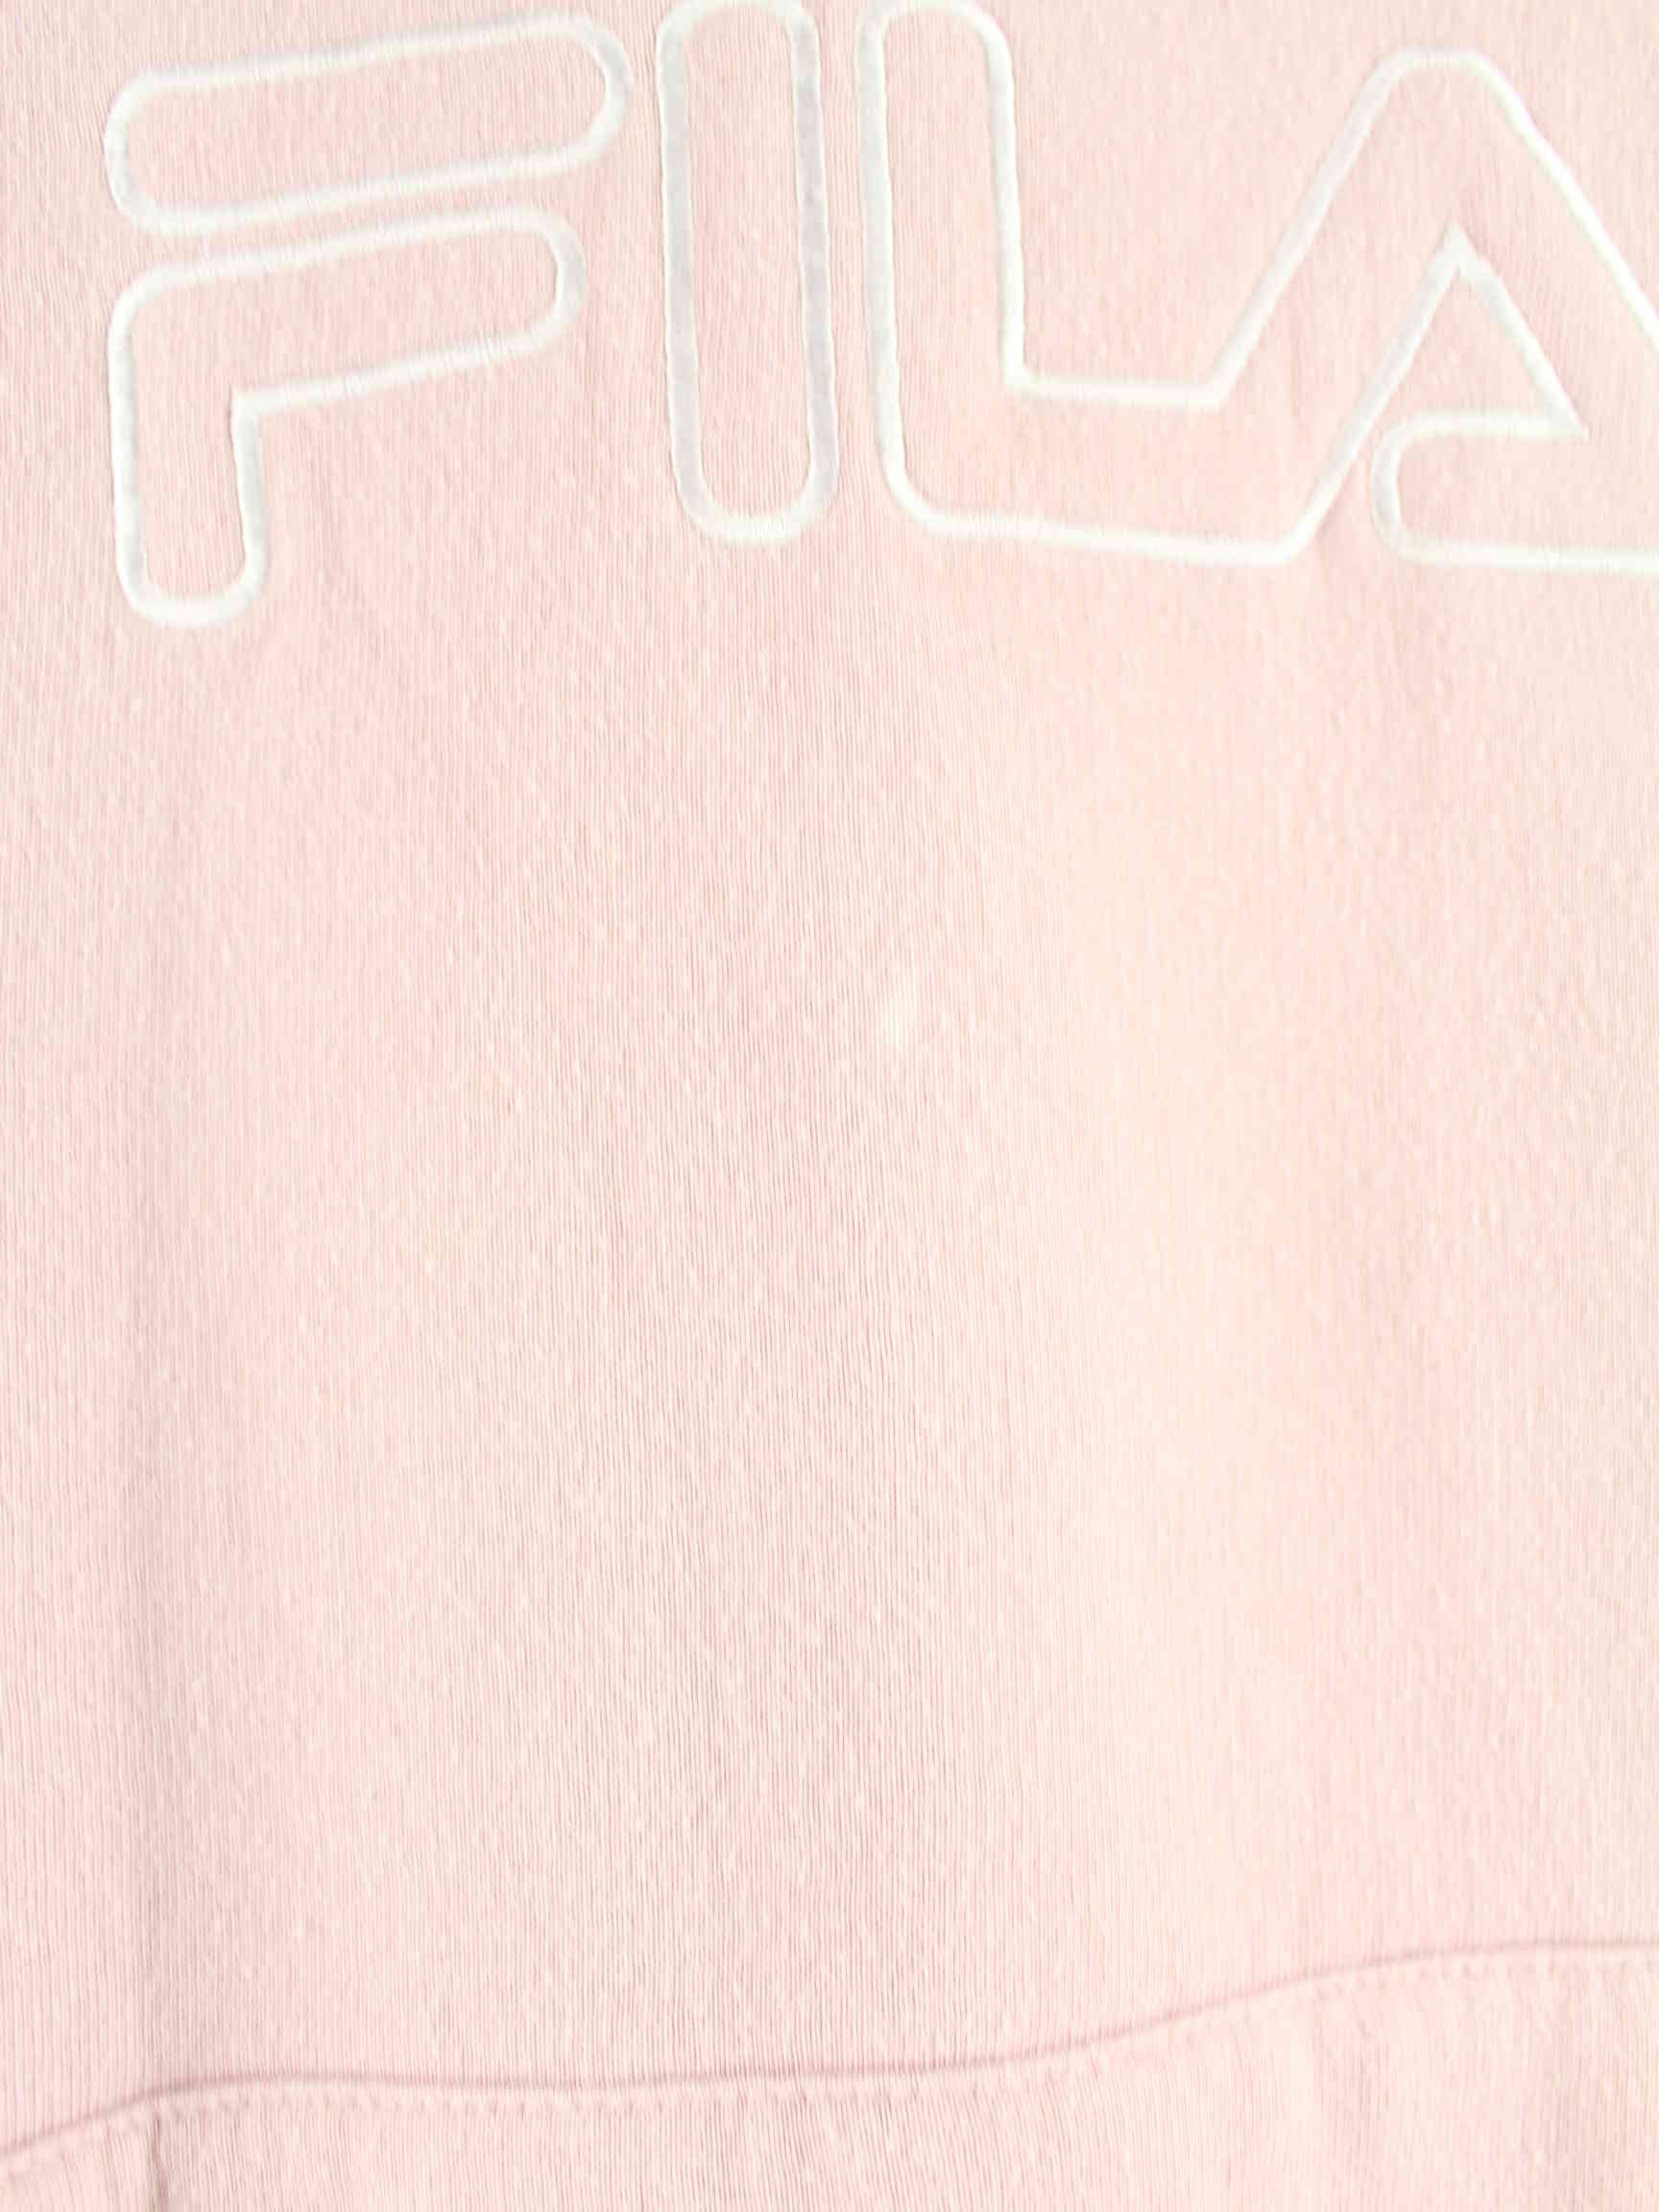 Fila Embroidered Hoodie Rosa L (detail image 2)